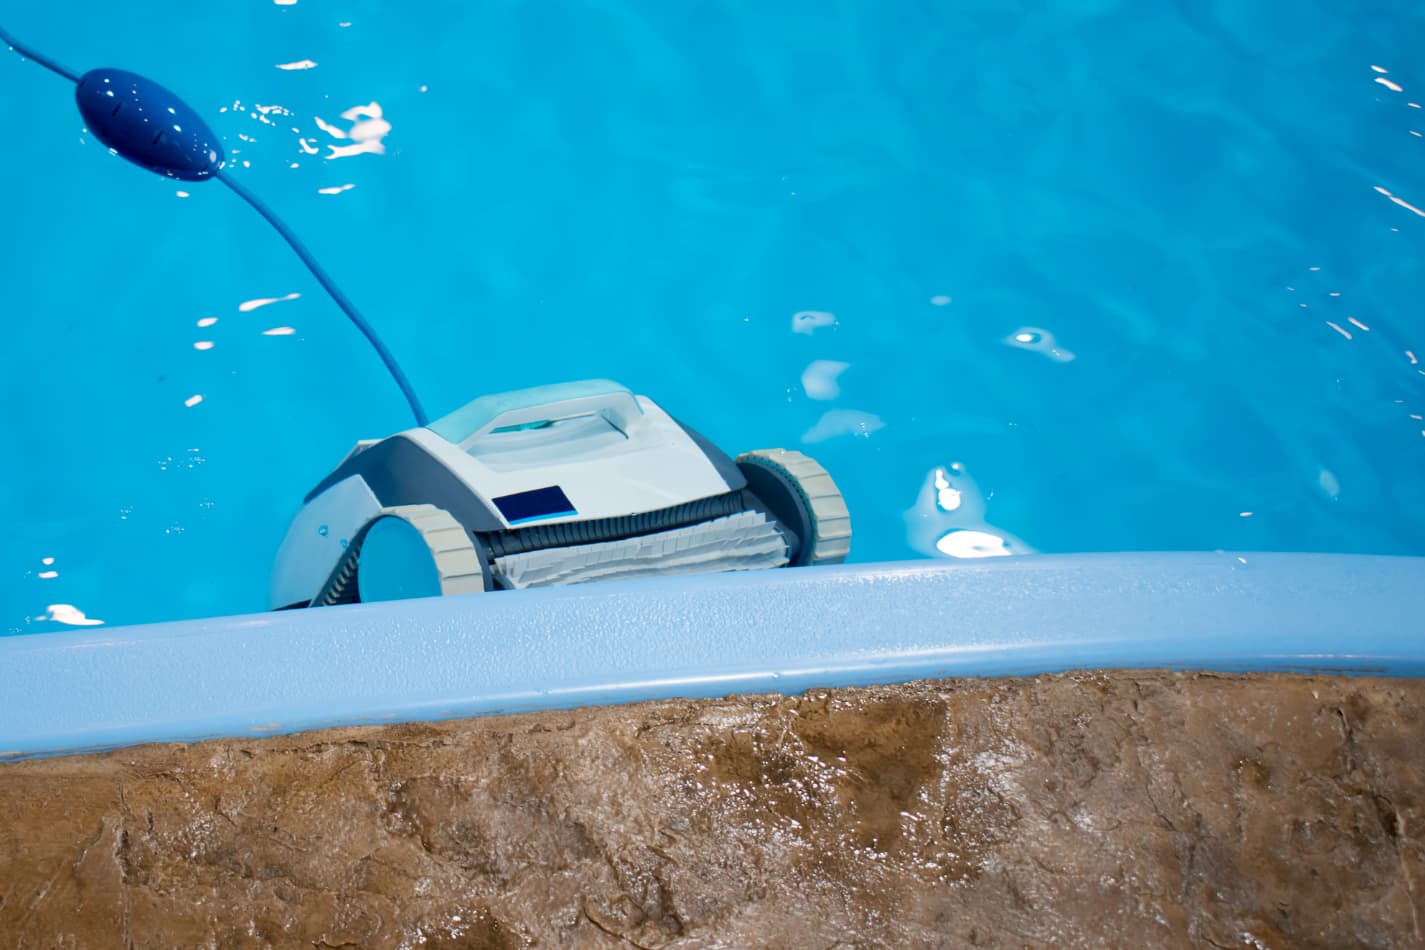 Pool Robot Problems: Why Do Pool Robots Go In Circles?